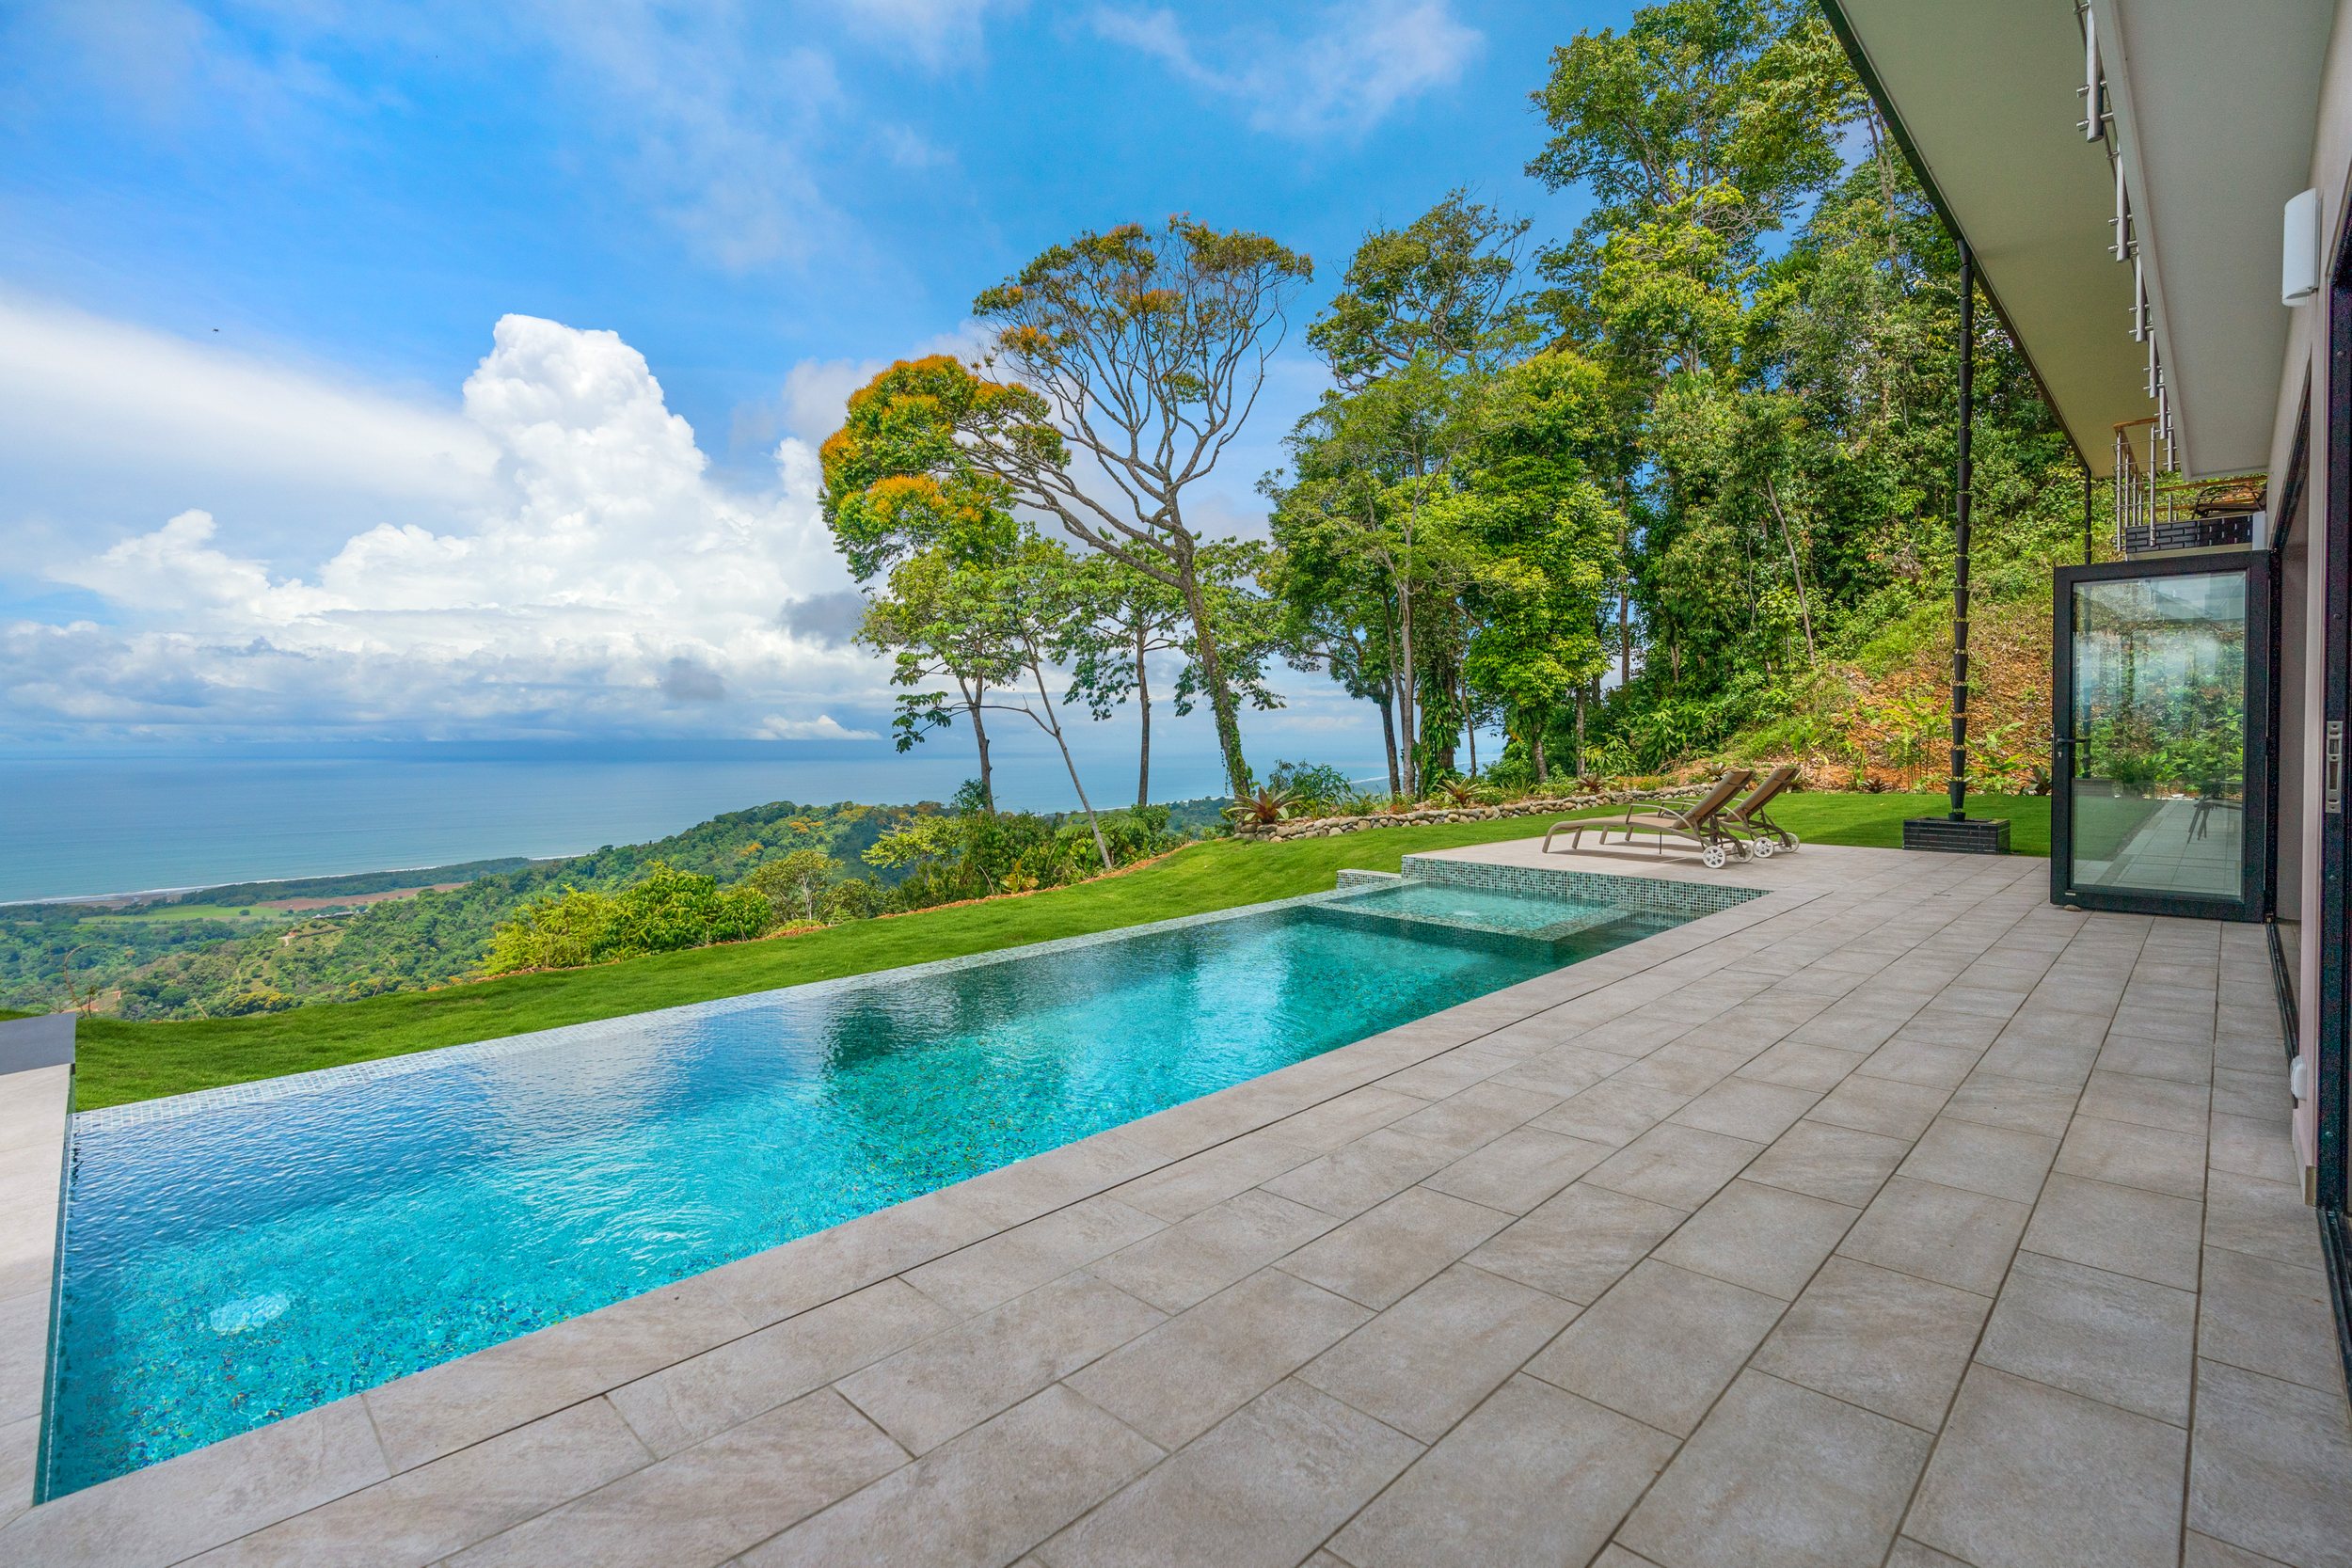 sell_my_home_now_photographer_costarica-67.JPG